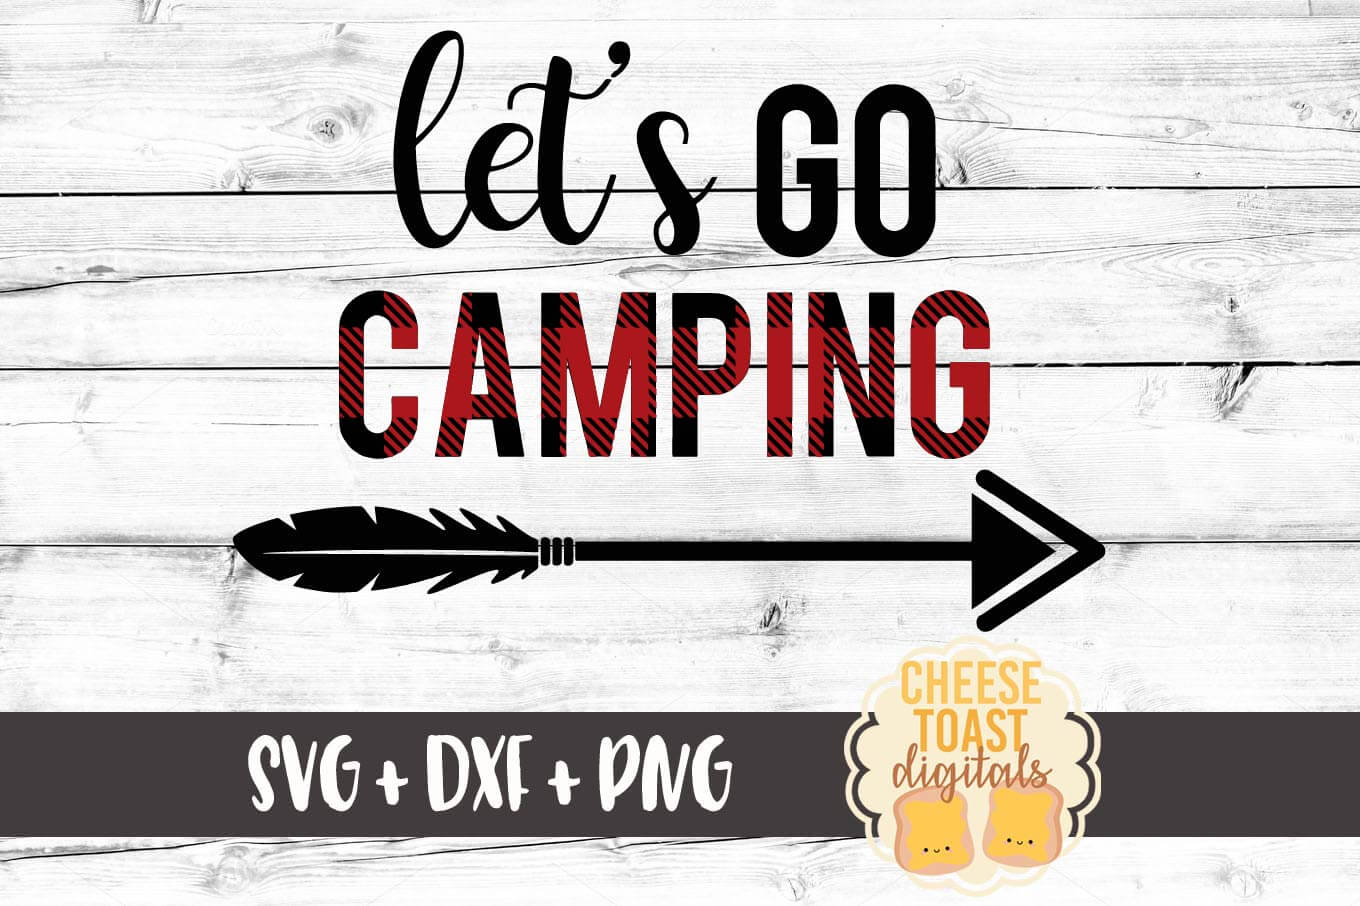 Let's Go Camping SVG - Free and Premium SVG Files - Cheese ...